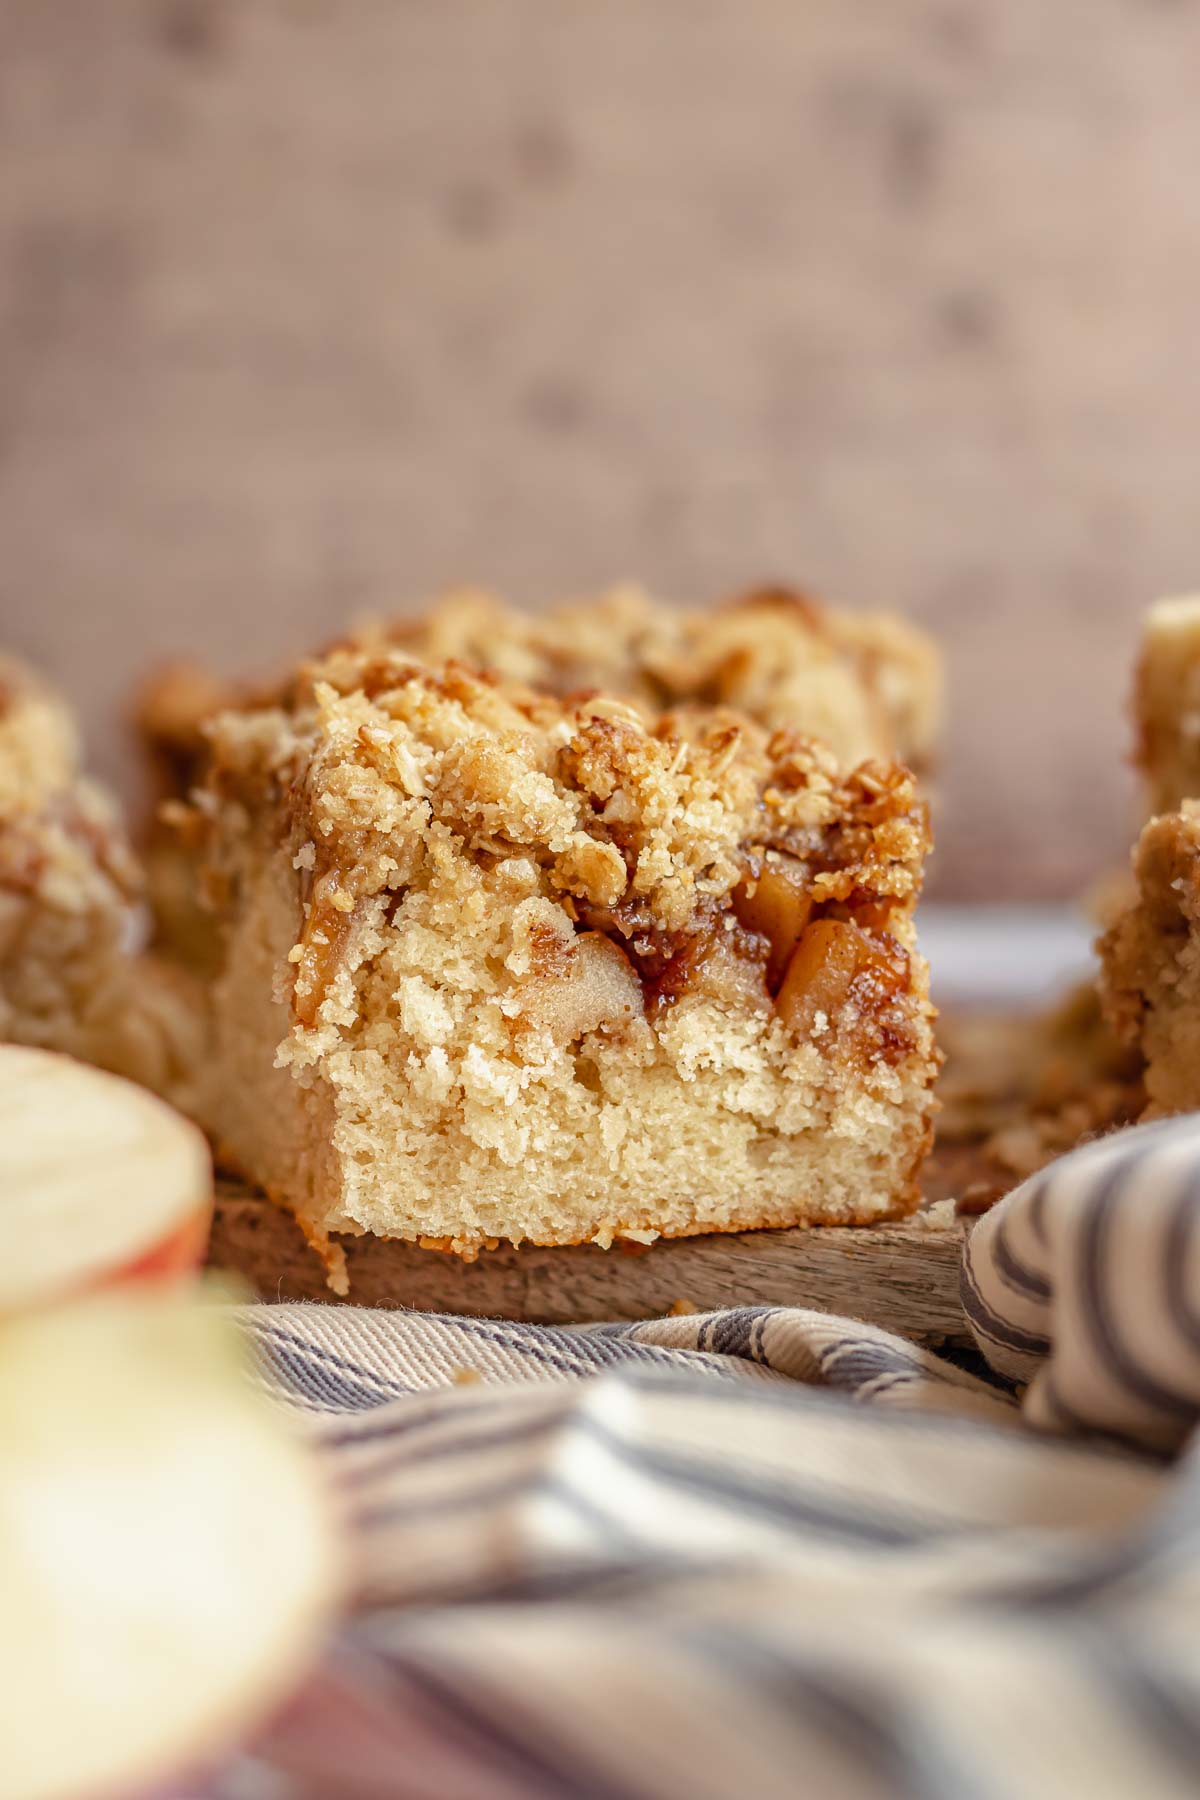 One slice of apple coffee cake showing the layers.